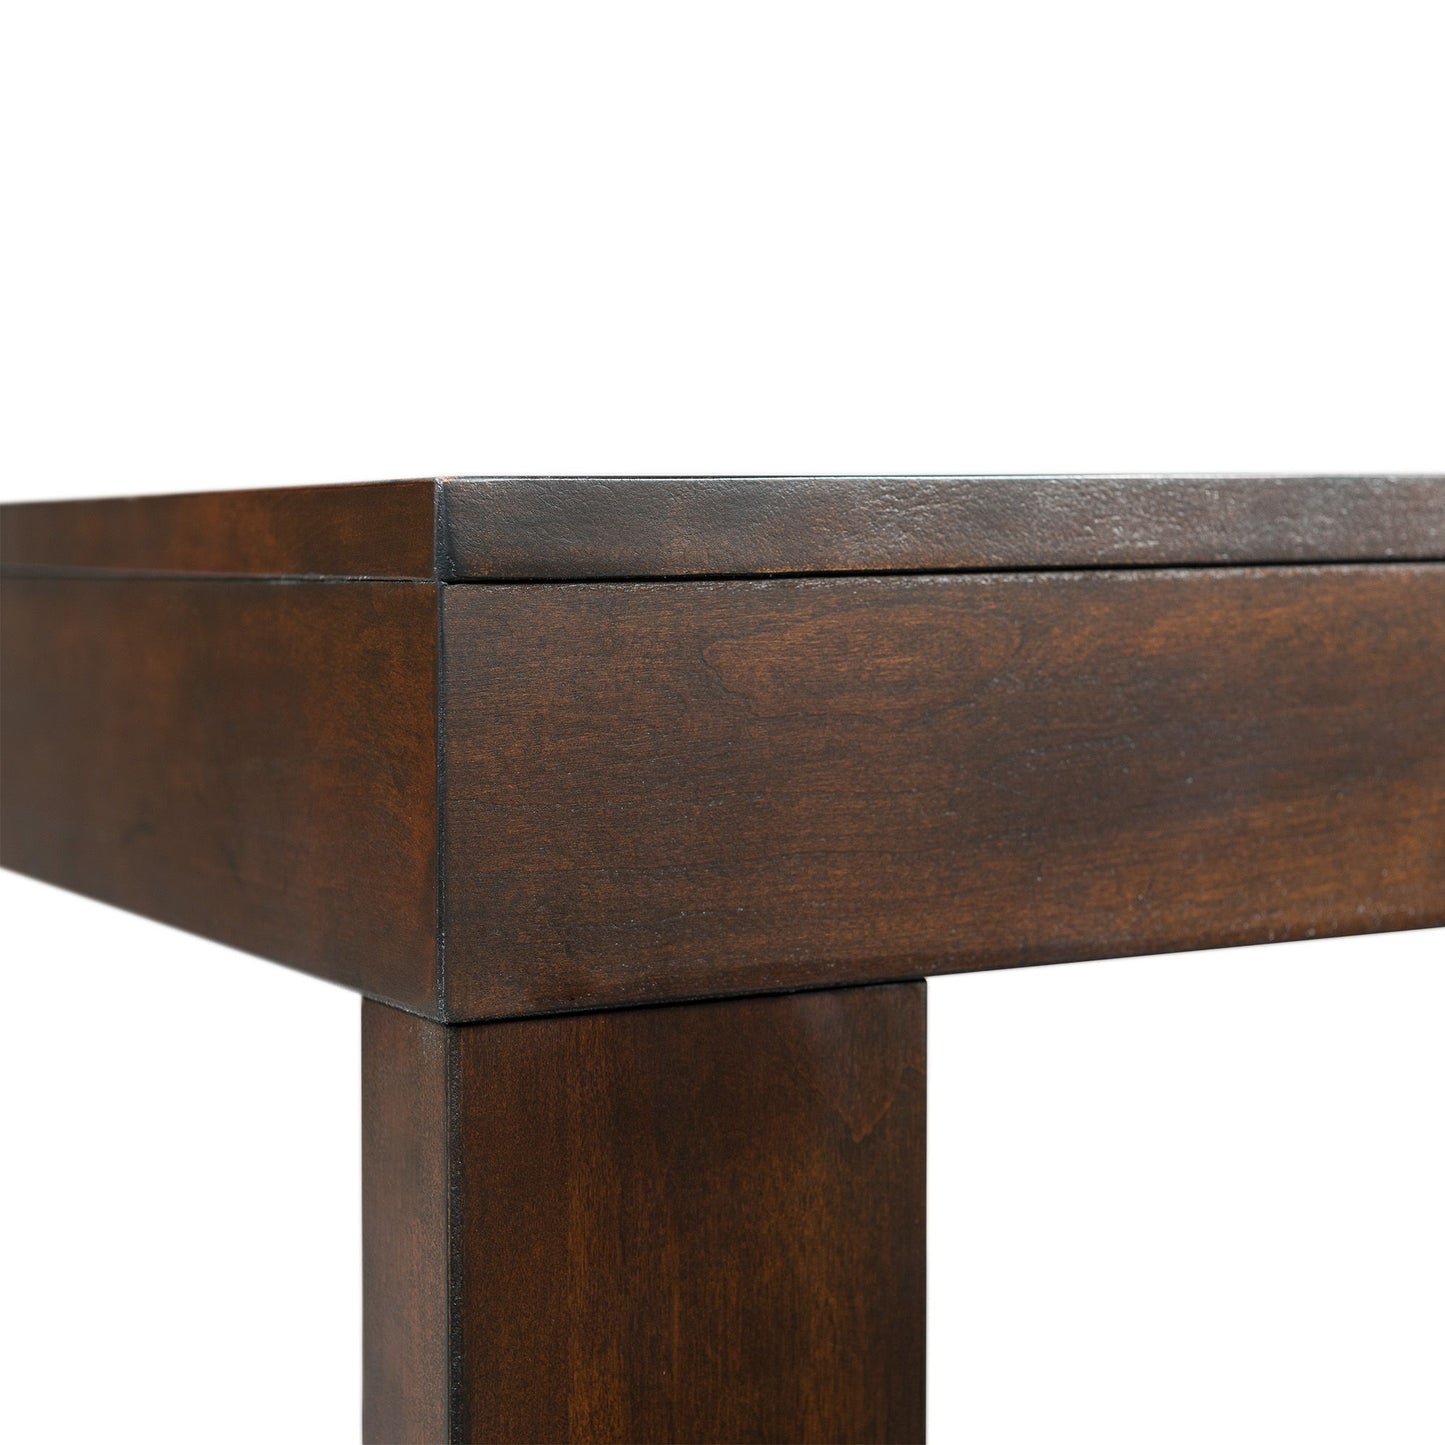 Hardy - Square End Table - Cherry